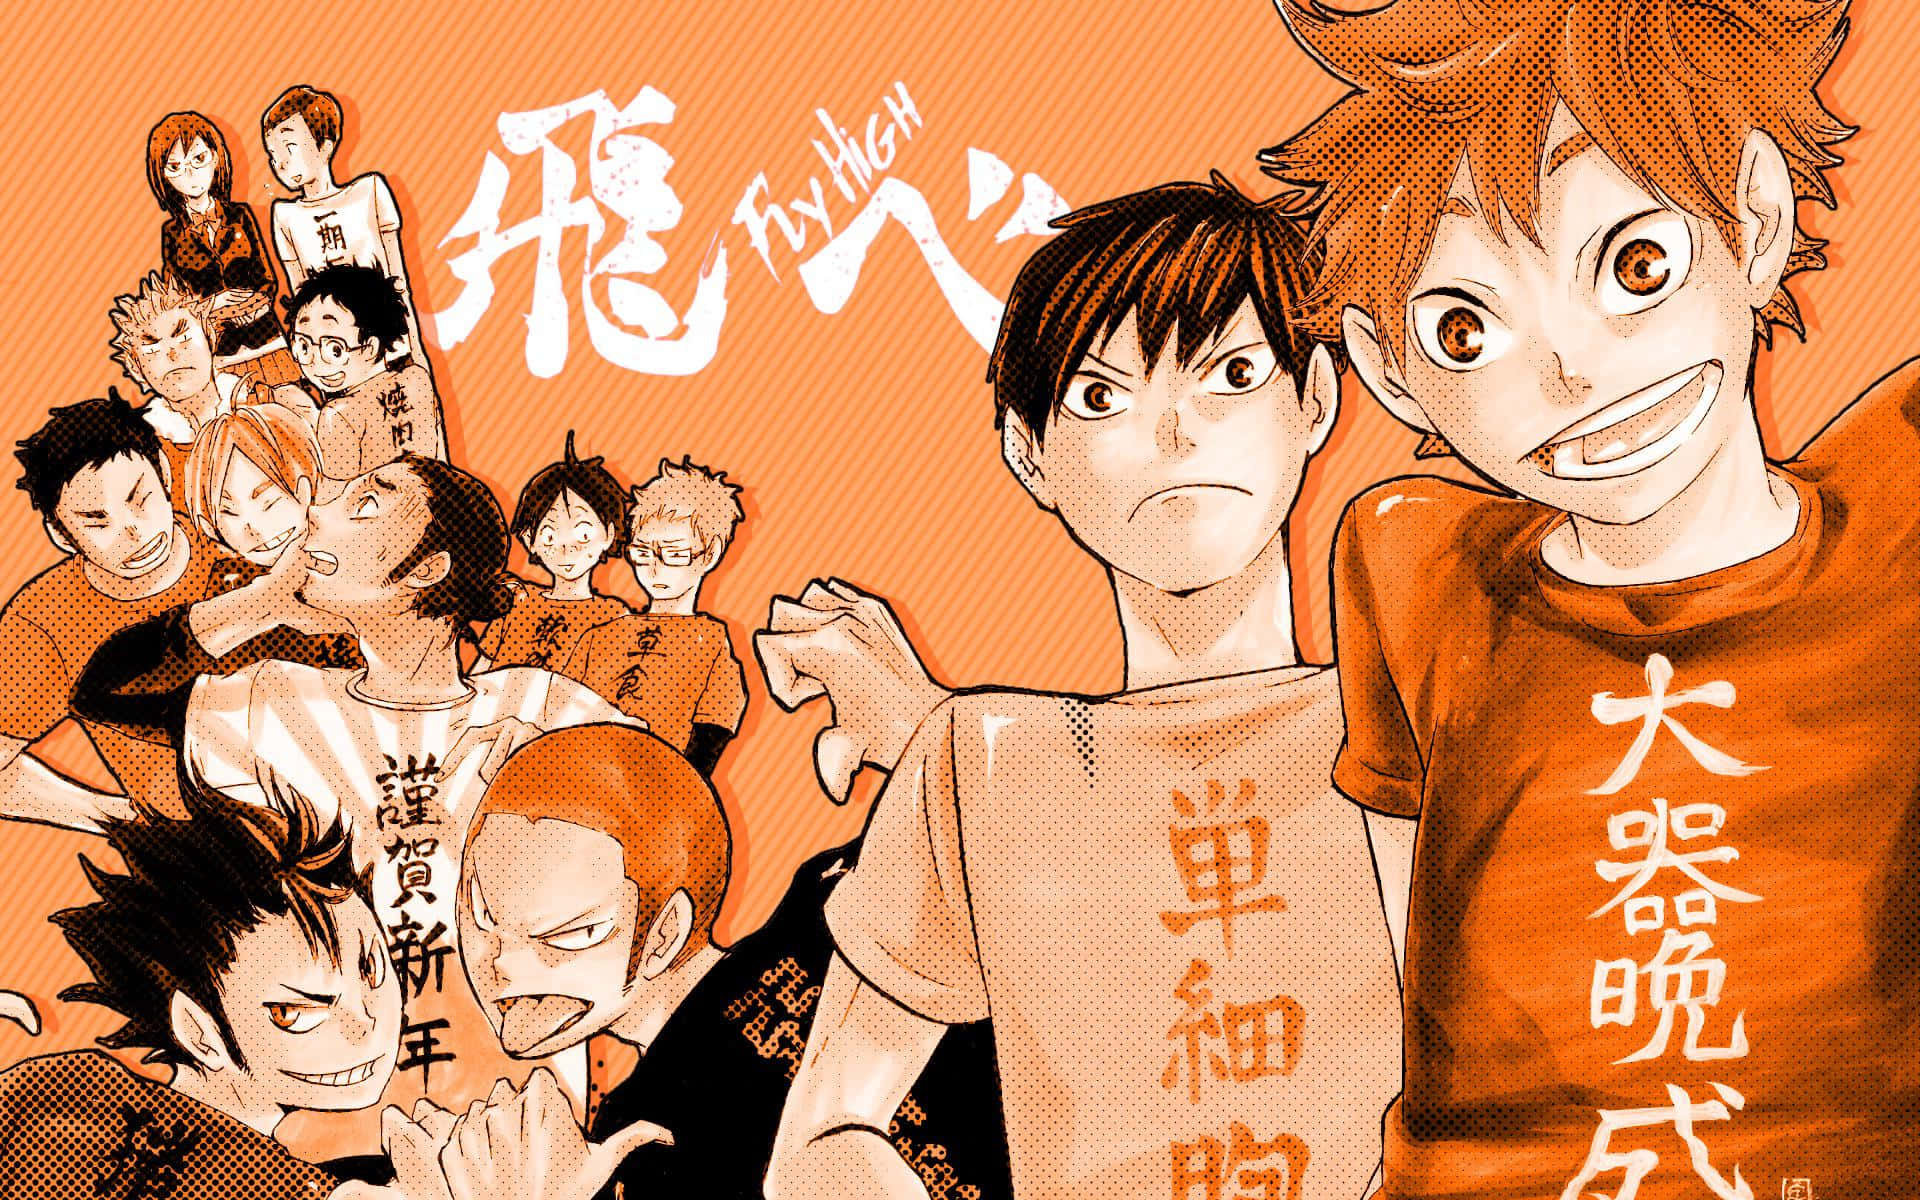 Karasuno Boys’ Volleyball team inspiring youngsters to chase their dreams!